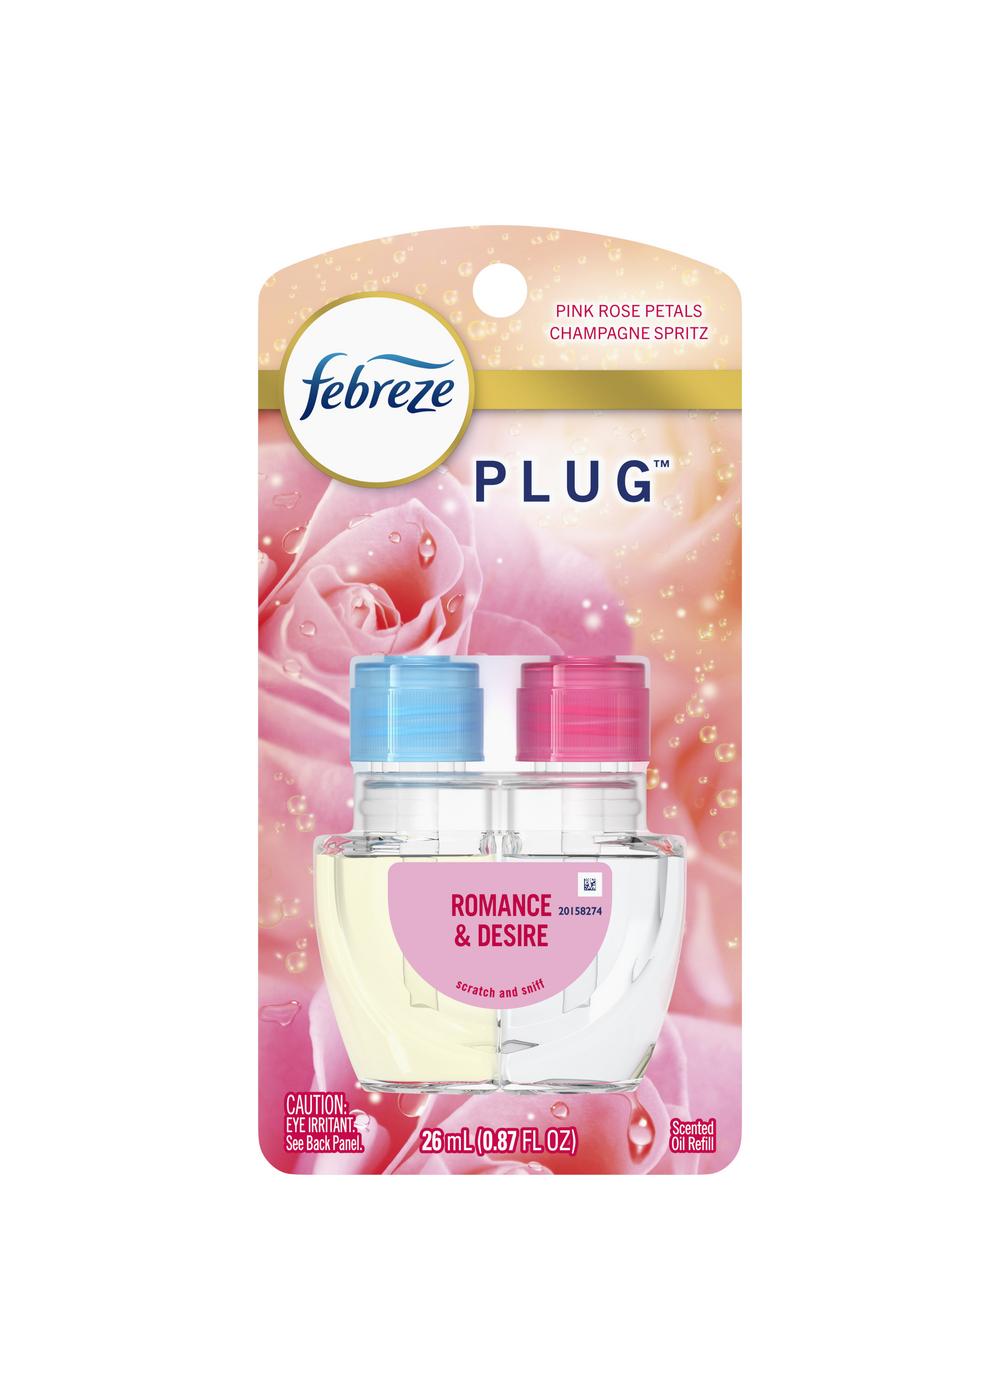 Febreze Plug Scented Oil Refill, with Downy April Fresh Scent - 2 pack, 26 ml refills